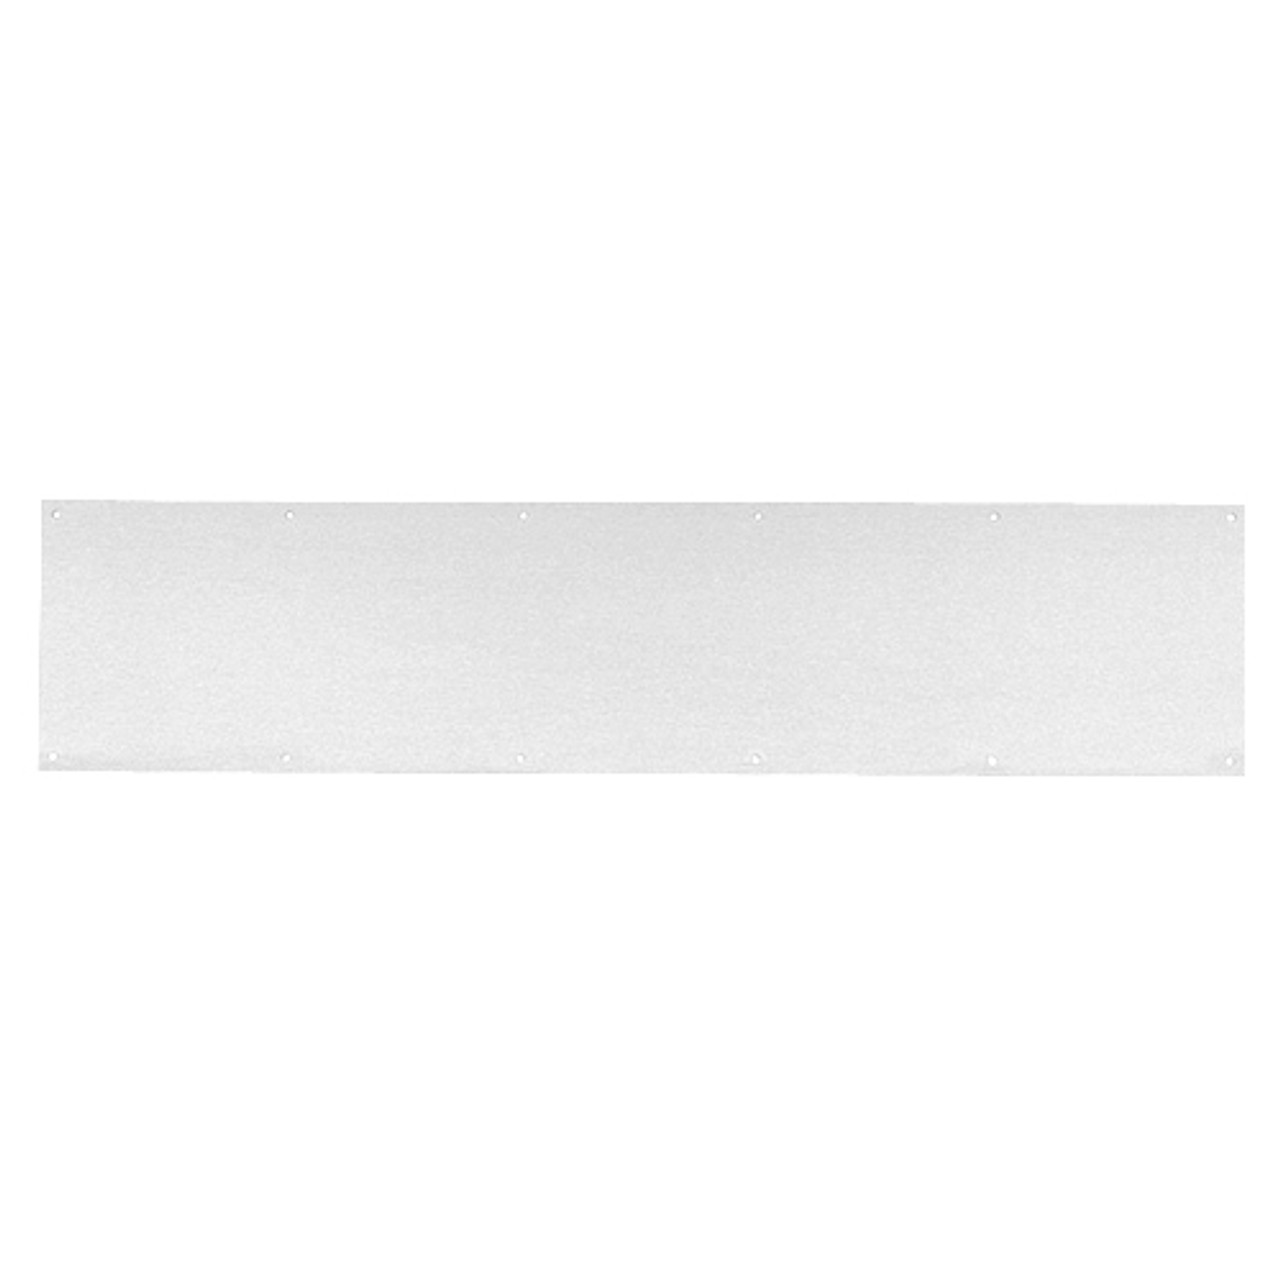 8400-US28-8x33.5-B-CS Ives 8400 Series Protection Plate in Aluminum